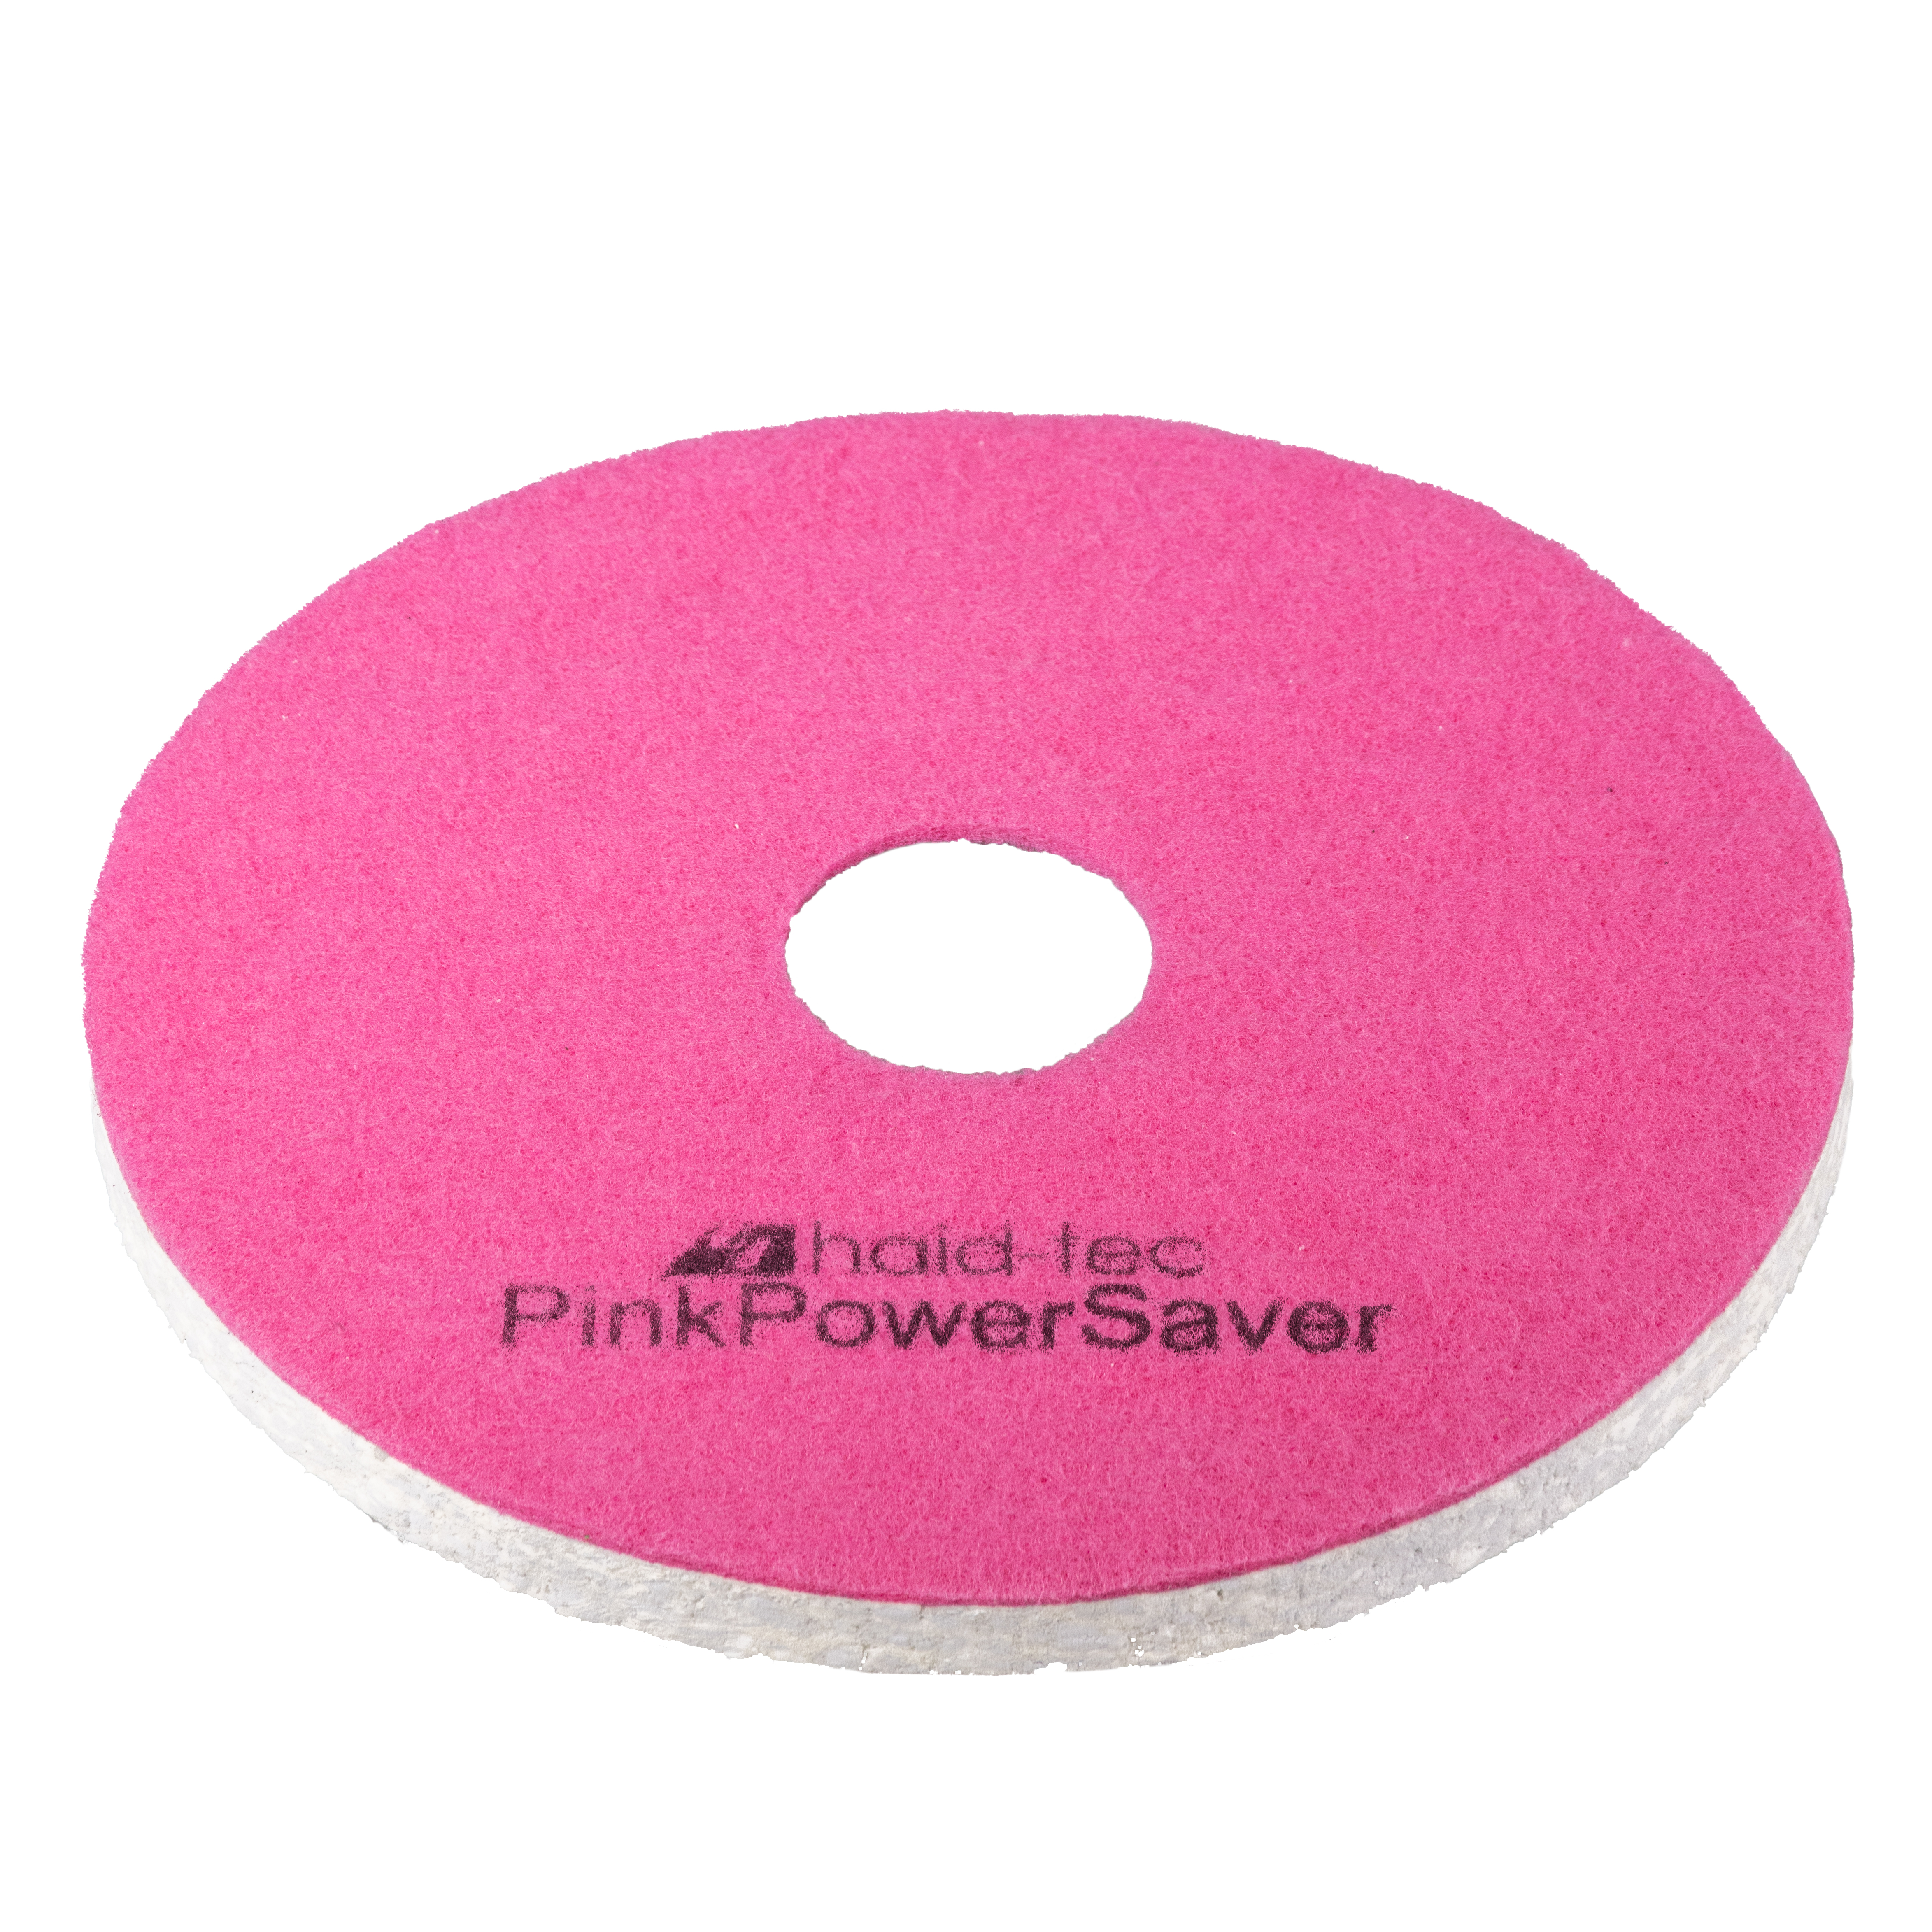 PinkPowerSaver Pad 8.6inch/218mm for Taski swingo 250 µicro, pad for compact scrubber dryer - melamine pad for intensive and maintenance cleaning